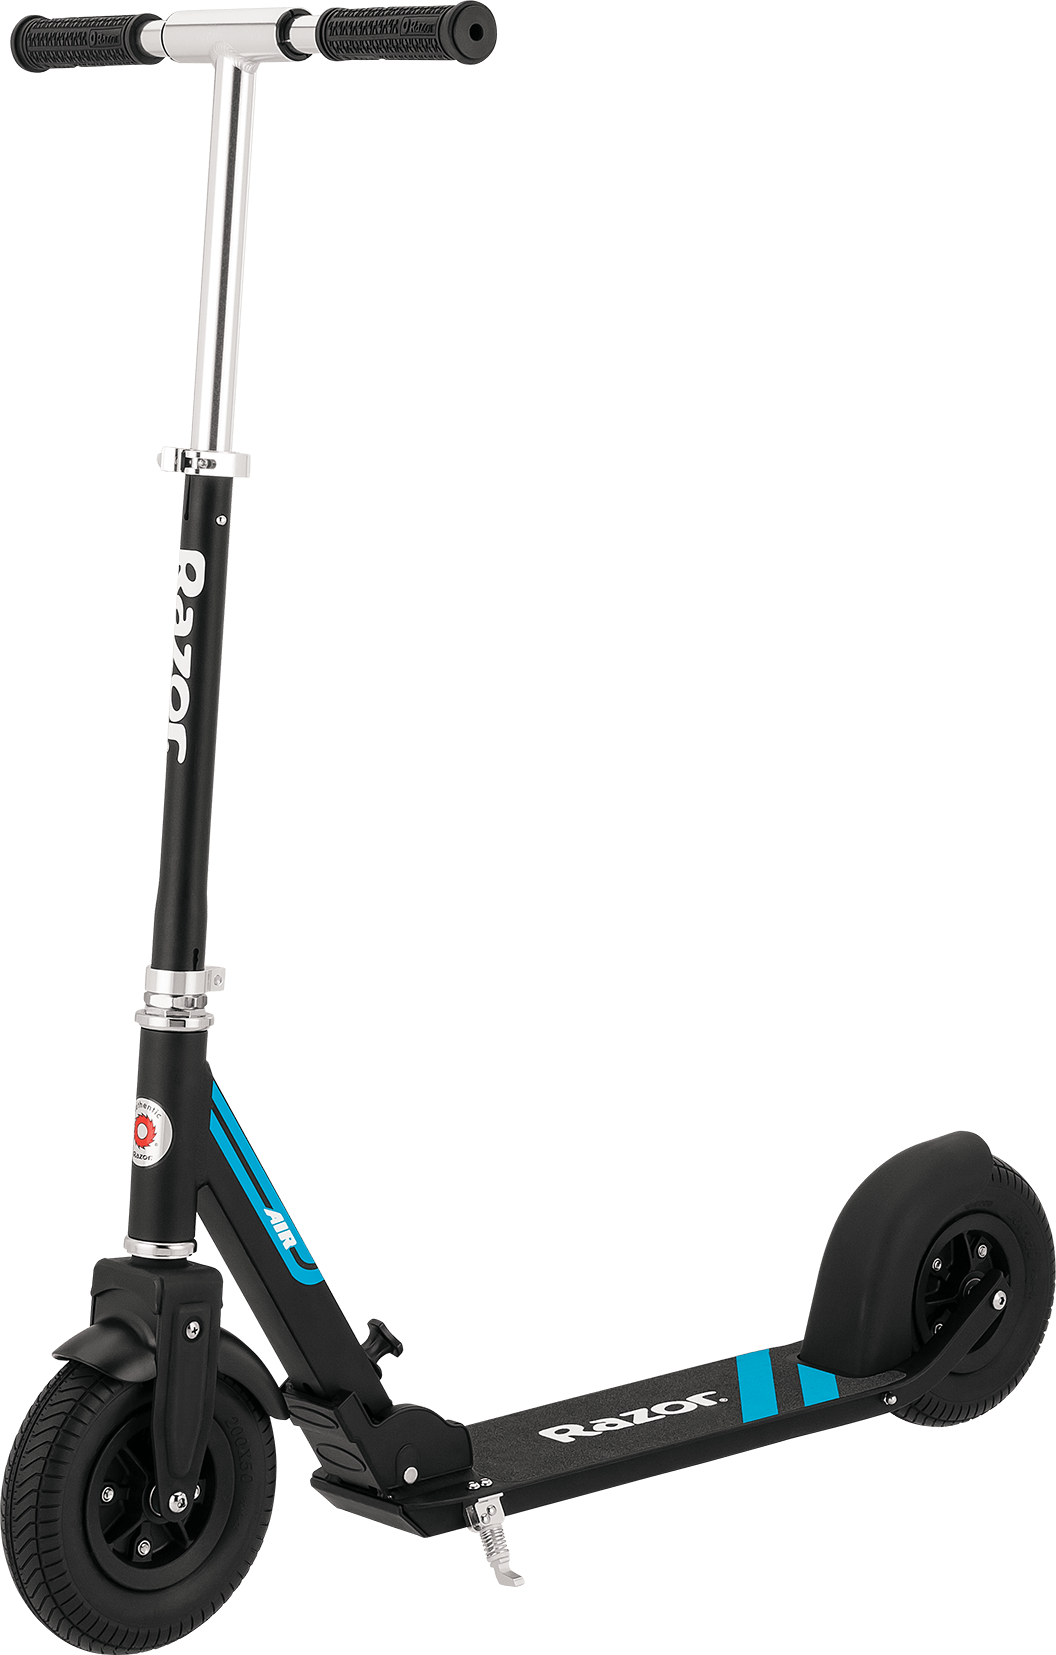 razor scooter for 7 year old